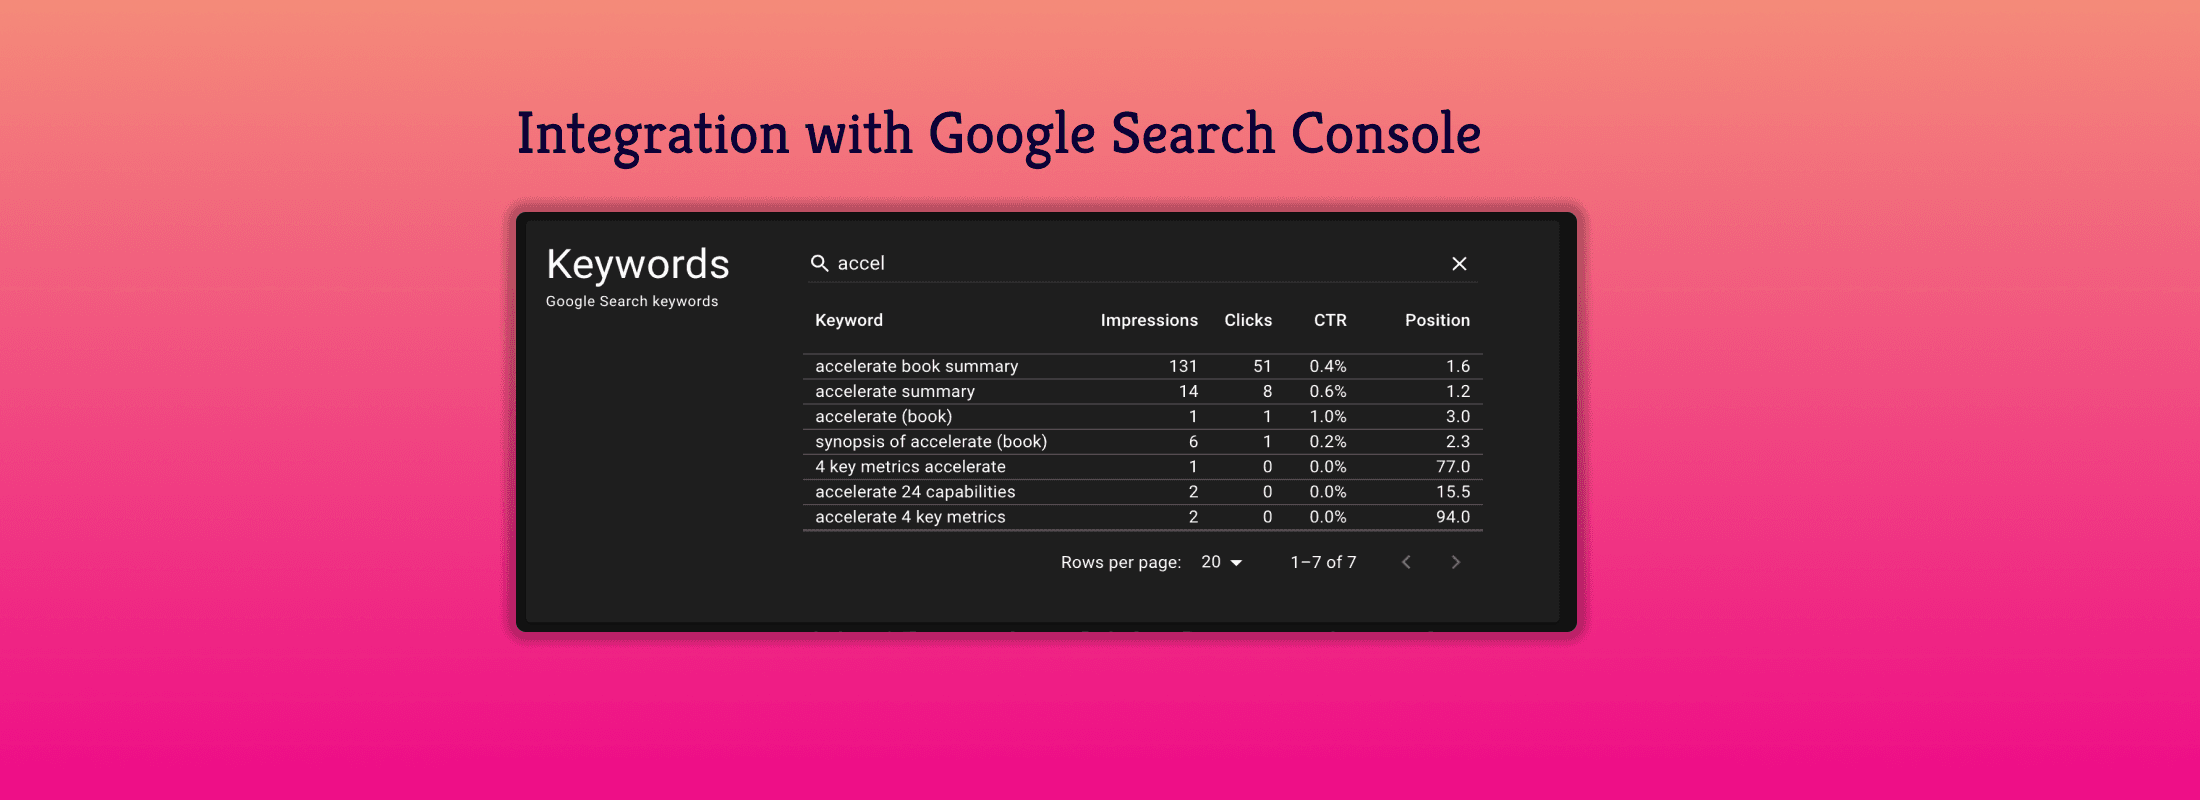 Integration with Google Search Console